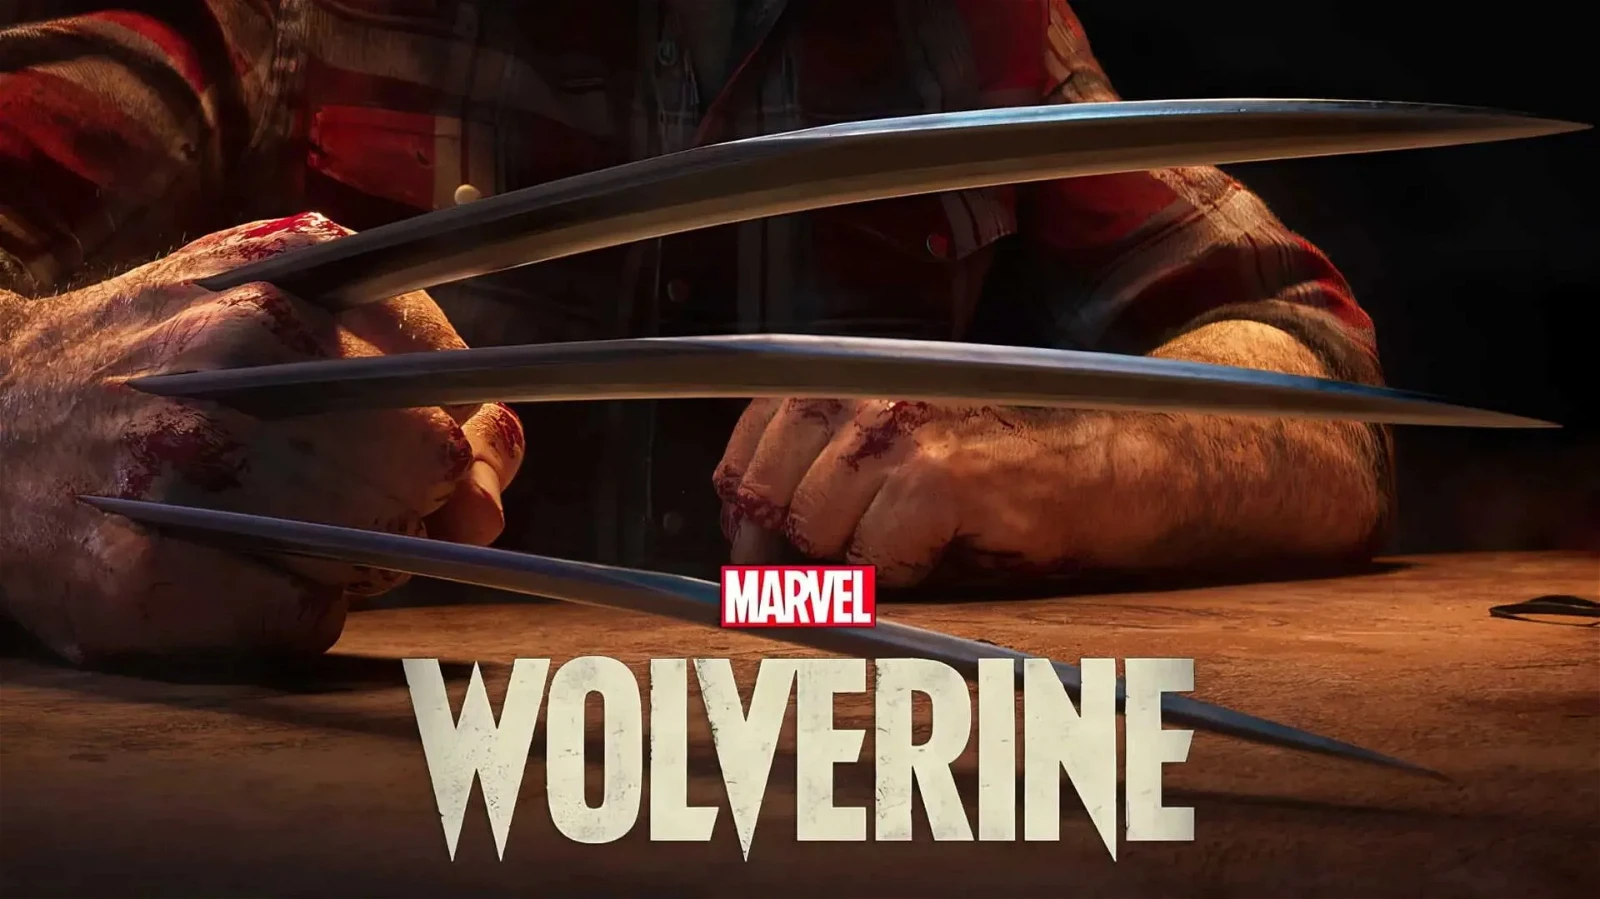 A teaser for the upcoming Marvel's Wolverine game.